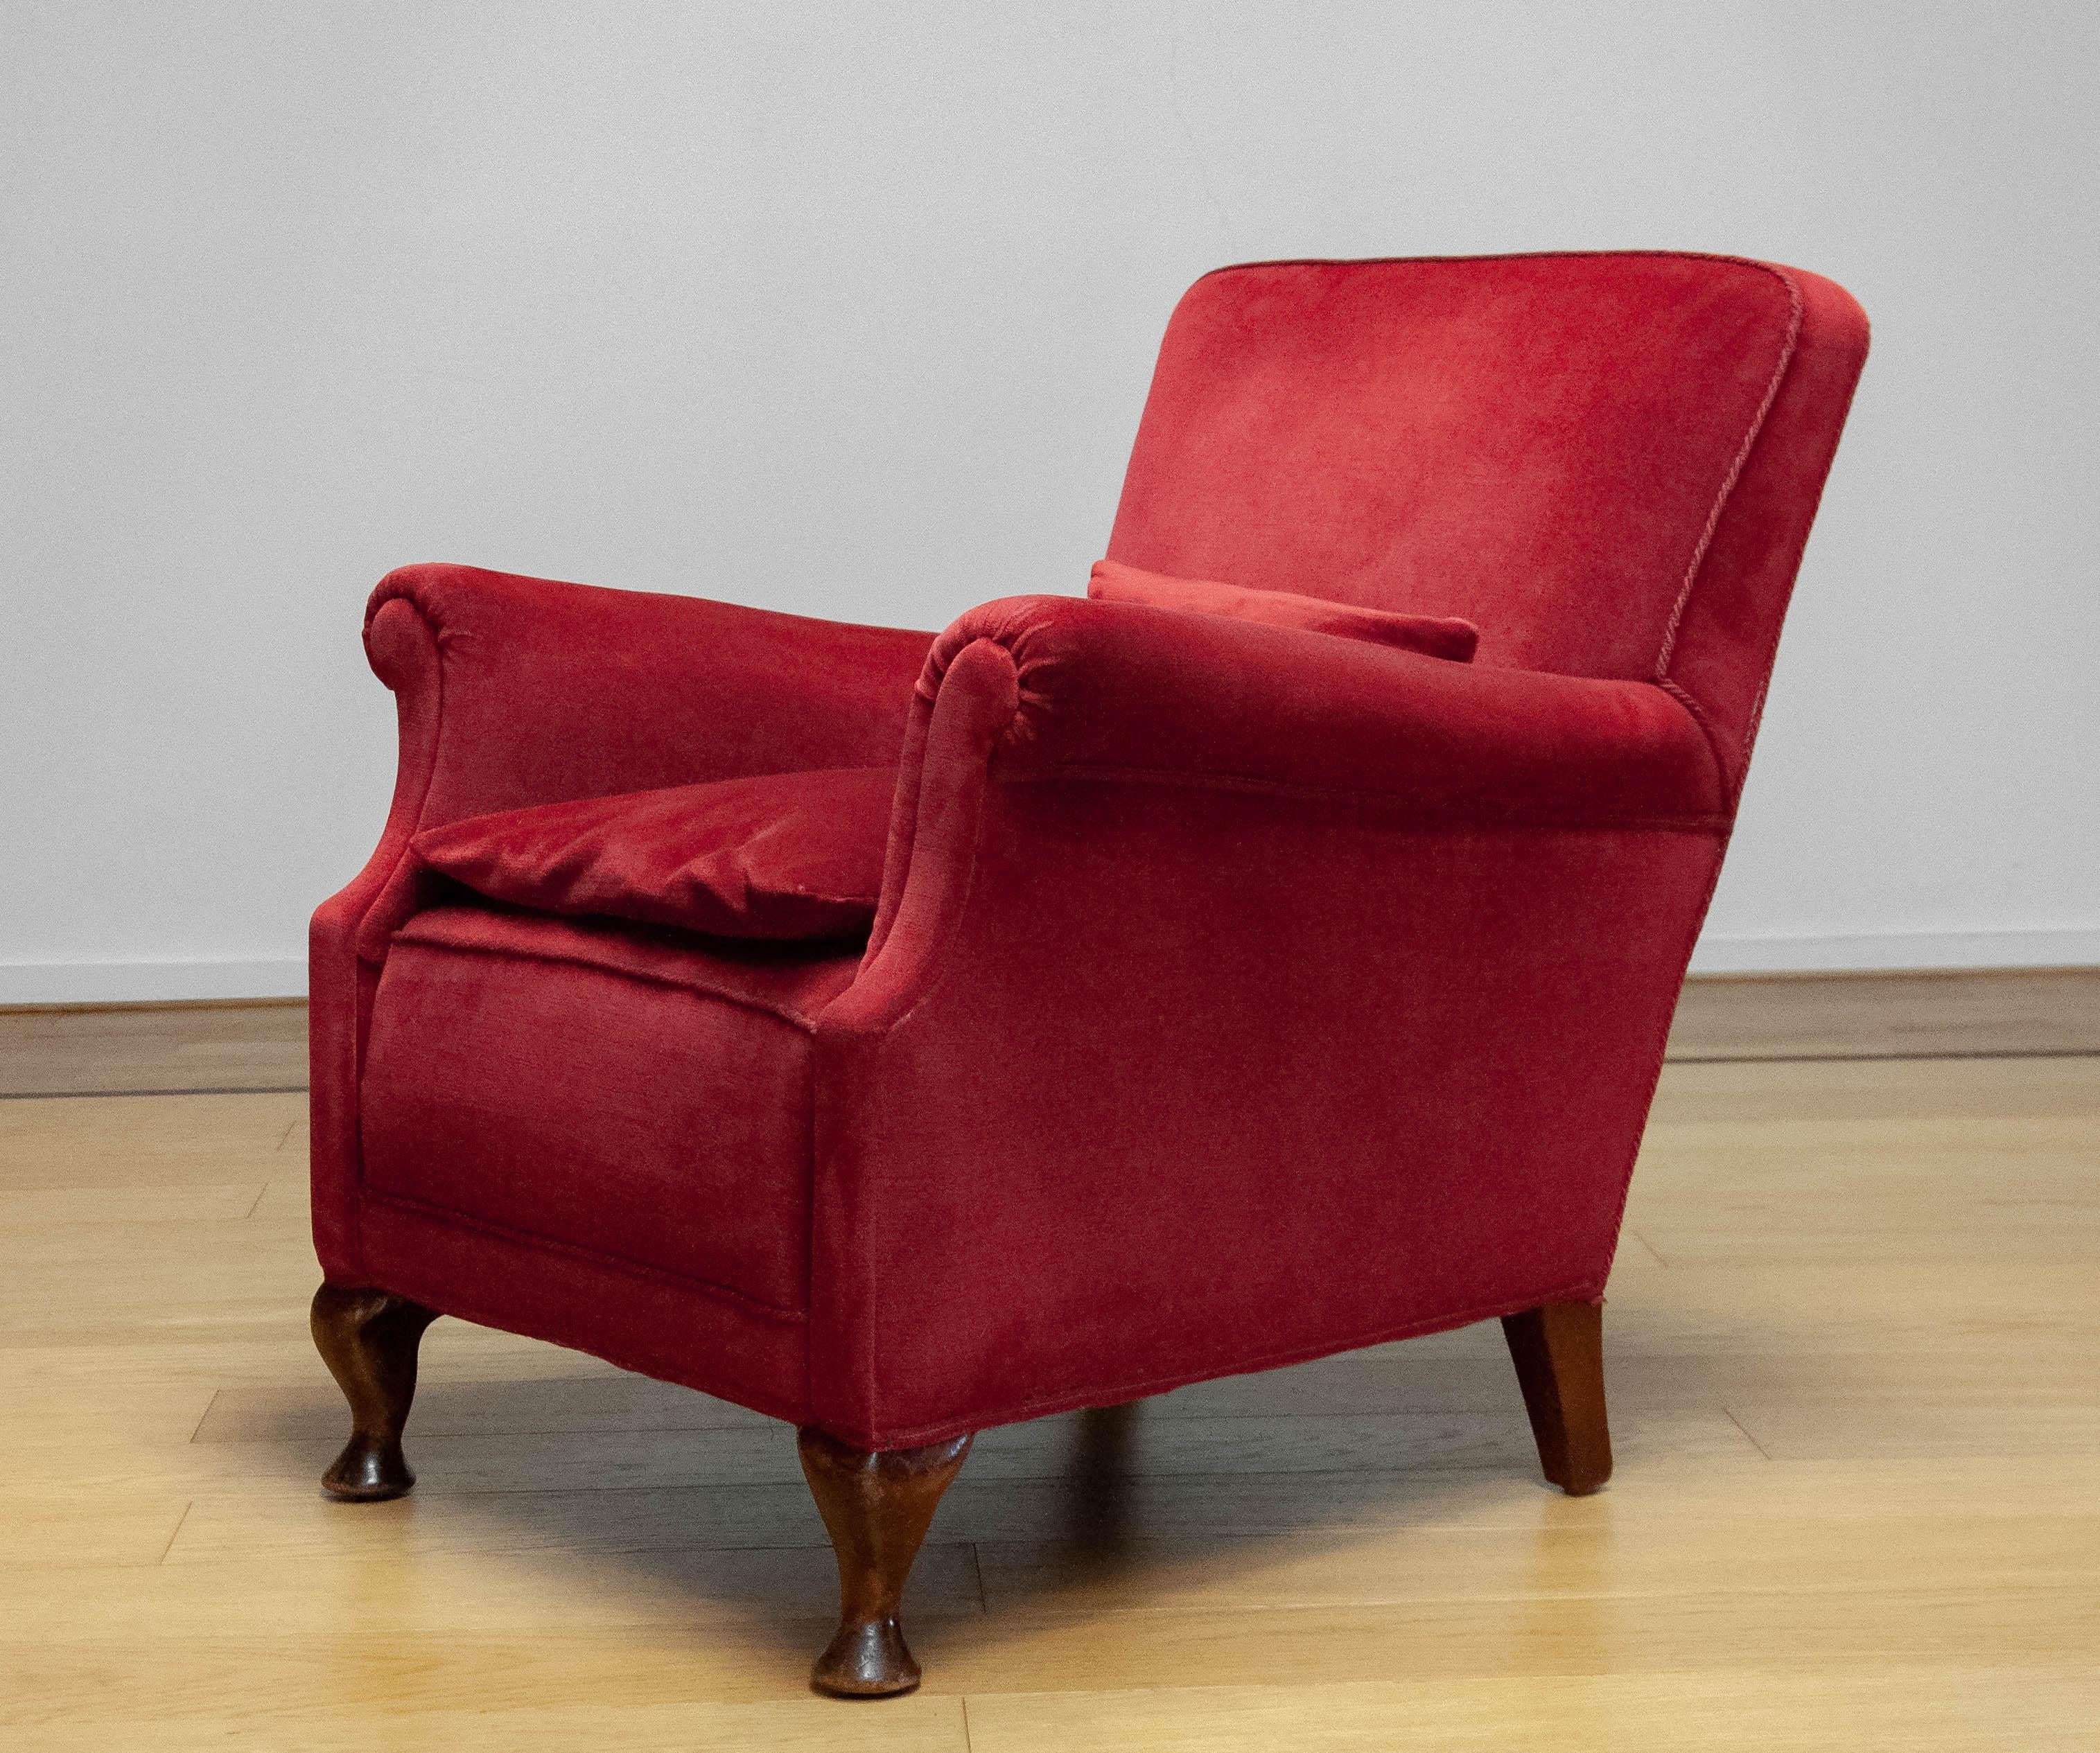 Beautiful Danish lounge chair from the 1930s reupholstered in the 1970s with red velvet / velours. The chairs is in very good and clean condition and sits very comfortable. Webbing and springs are all in good condition. The chair has an extra sit